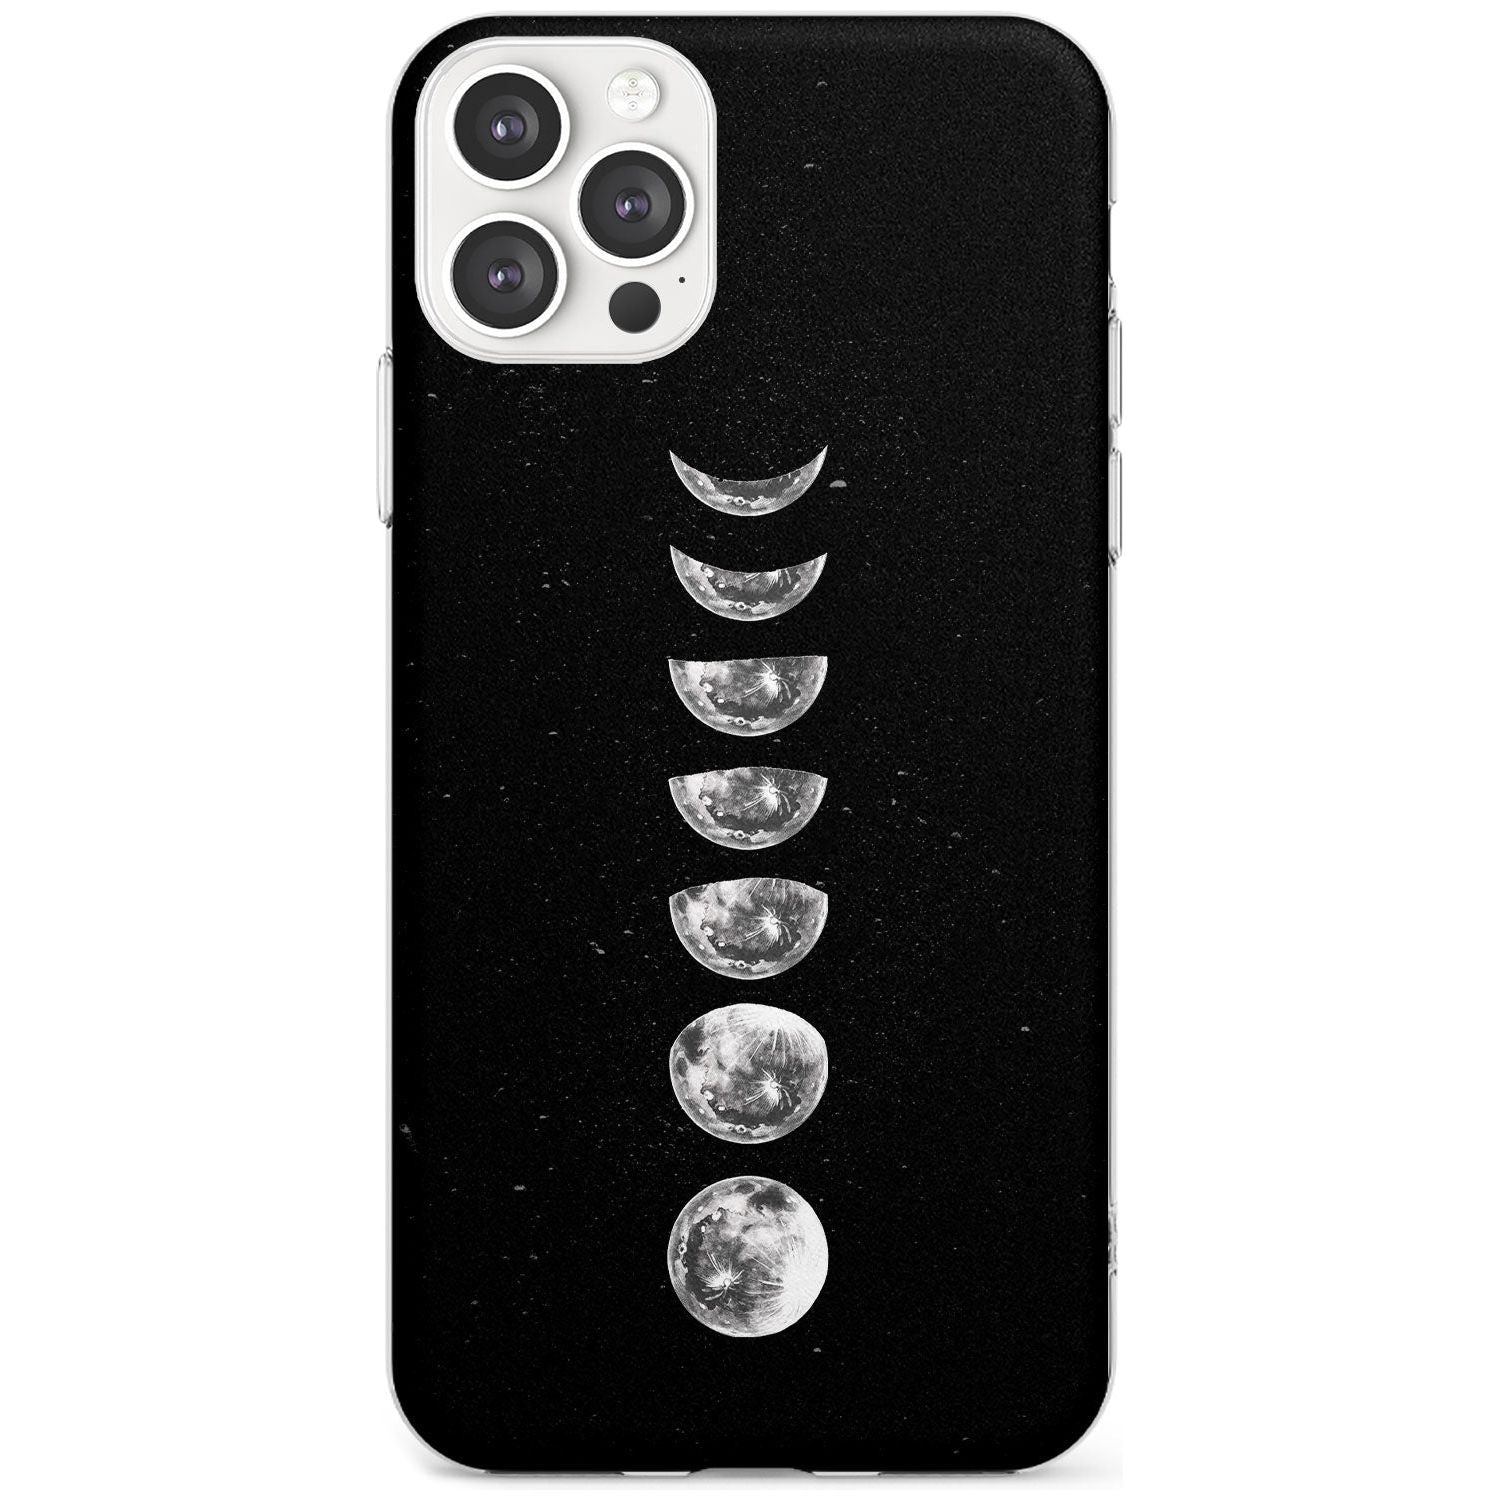 Light Watercolour Moons Black Impact Phone Case for iPhone 11 Pro Max